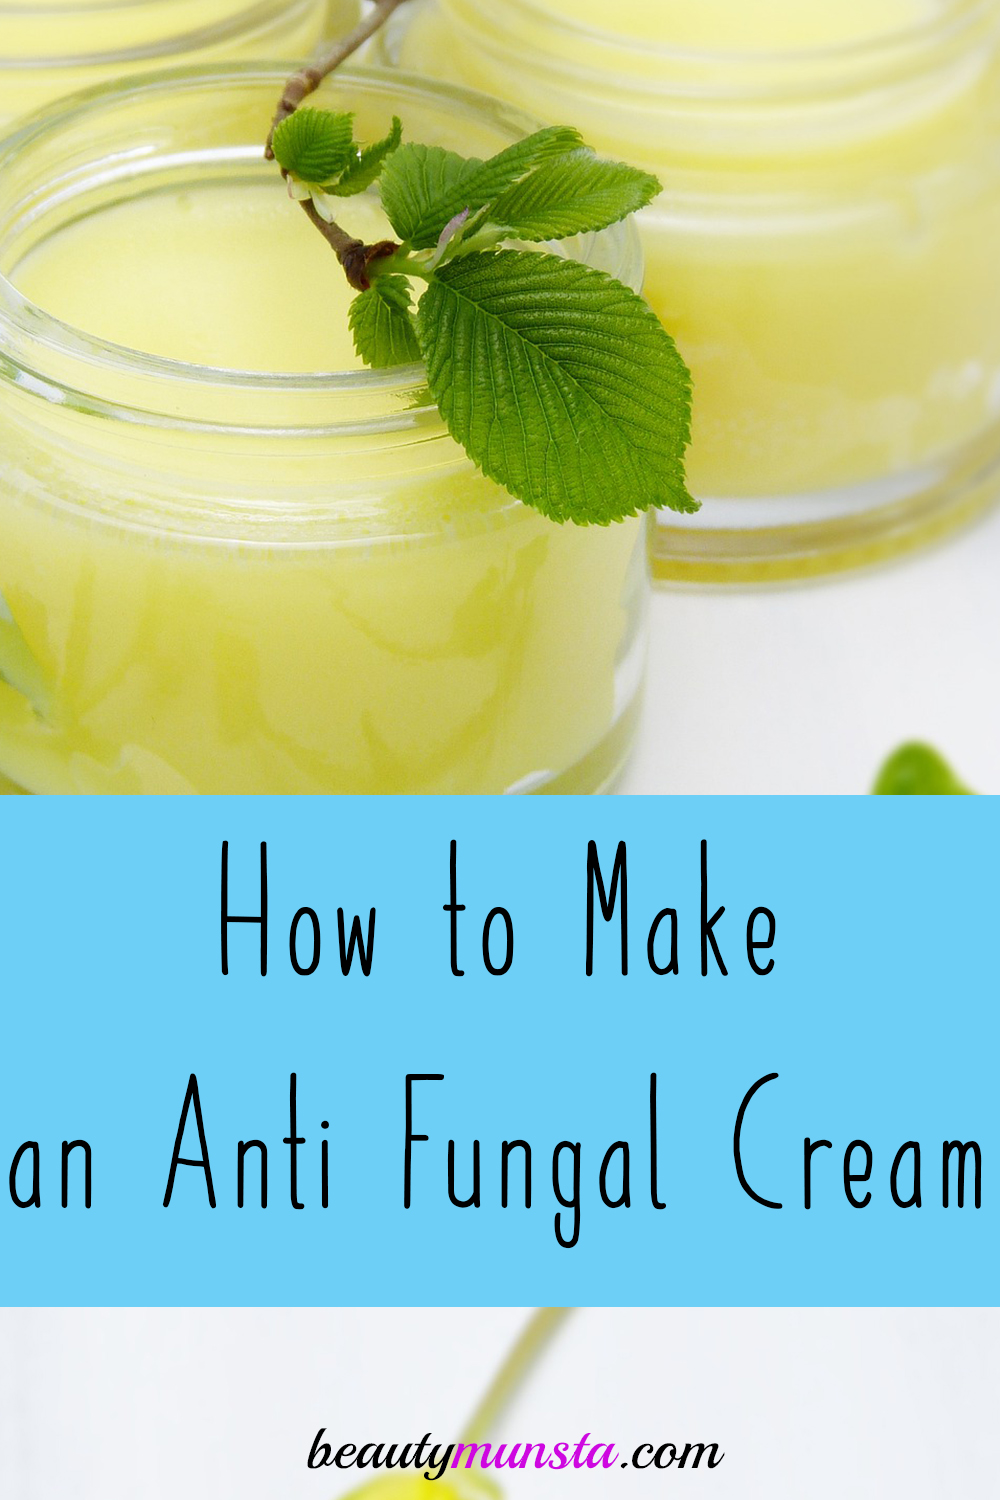 But adding a few other natural anti-fungal substances to shea butter can create a powerful DIY shea butter anti-fungal cream.